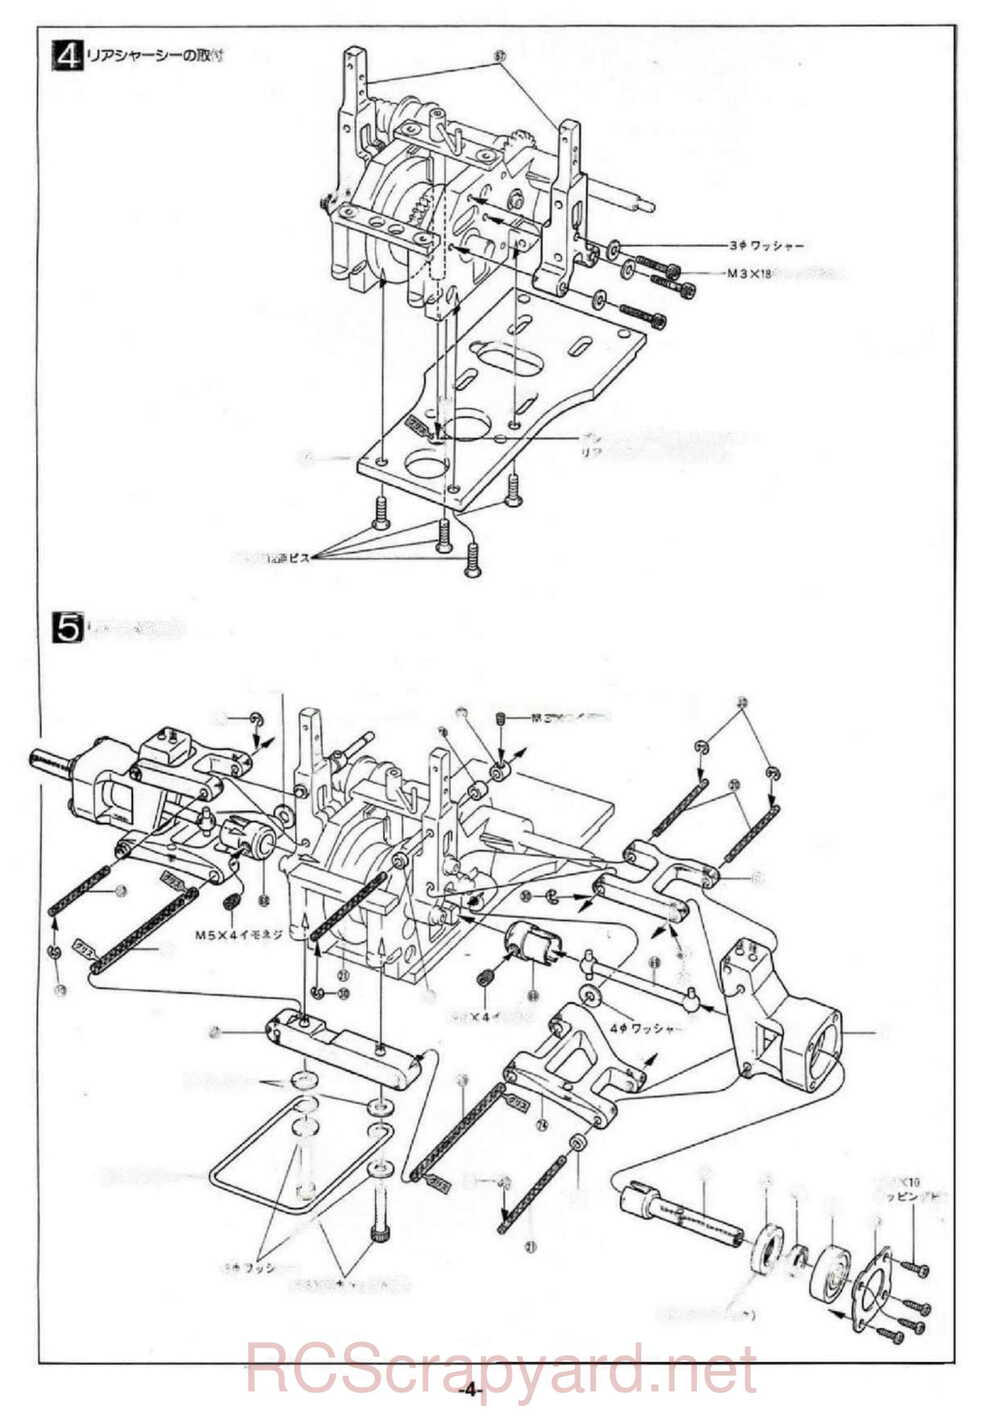 Kyosho - 3121 - Fantom-21 4iS - Manual - Page 04